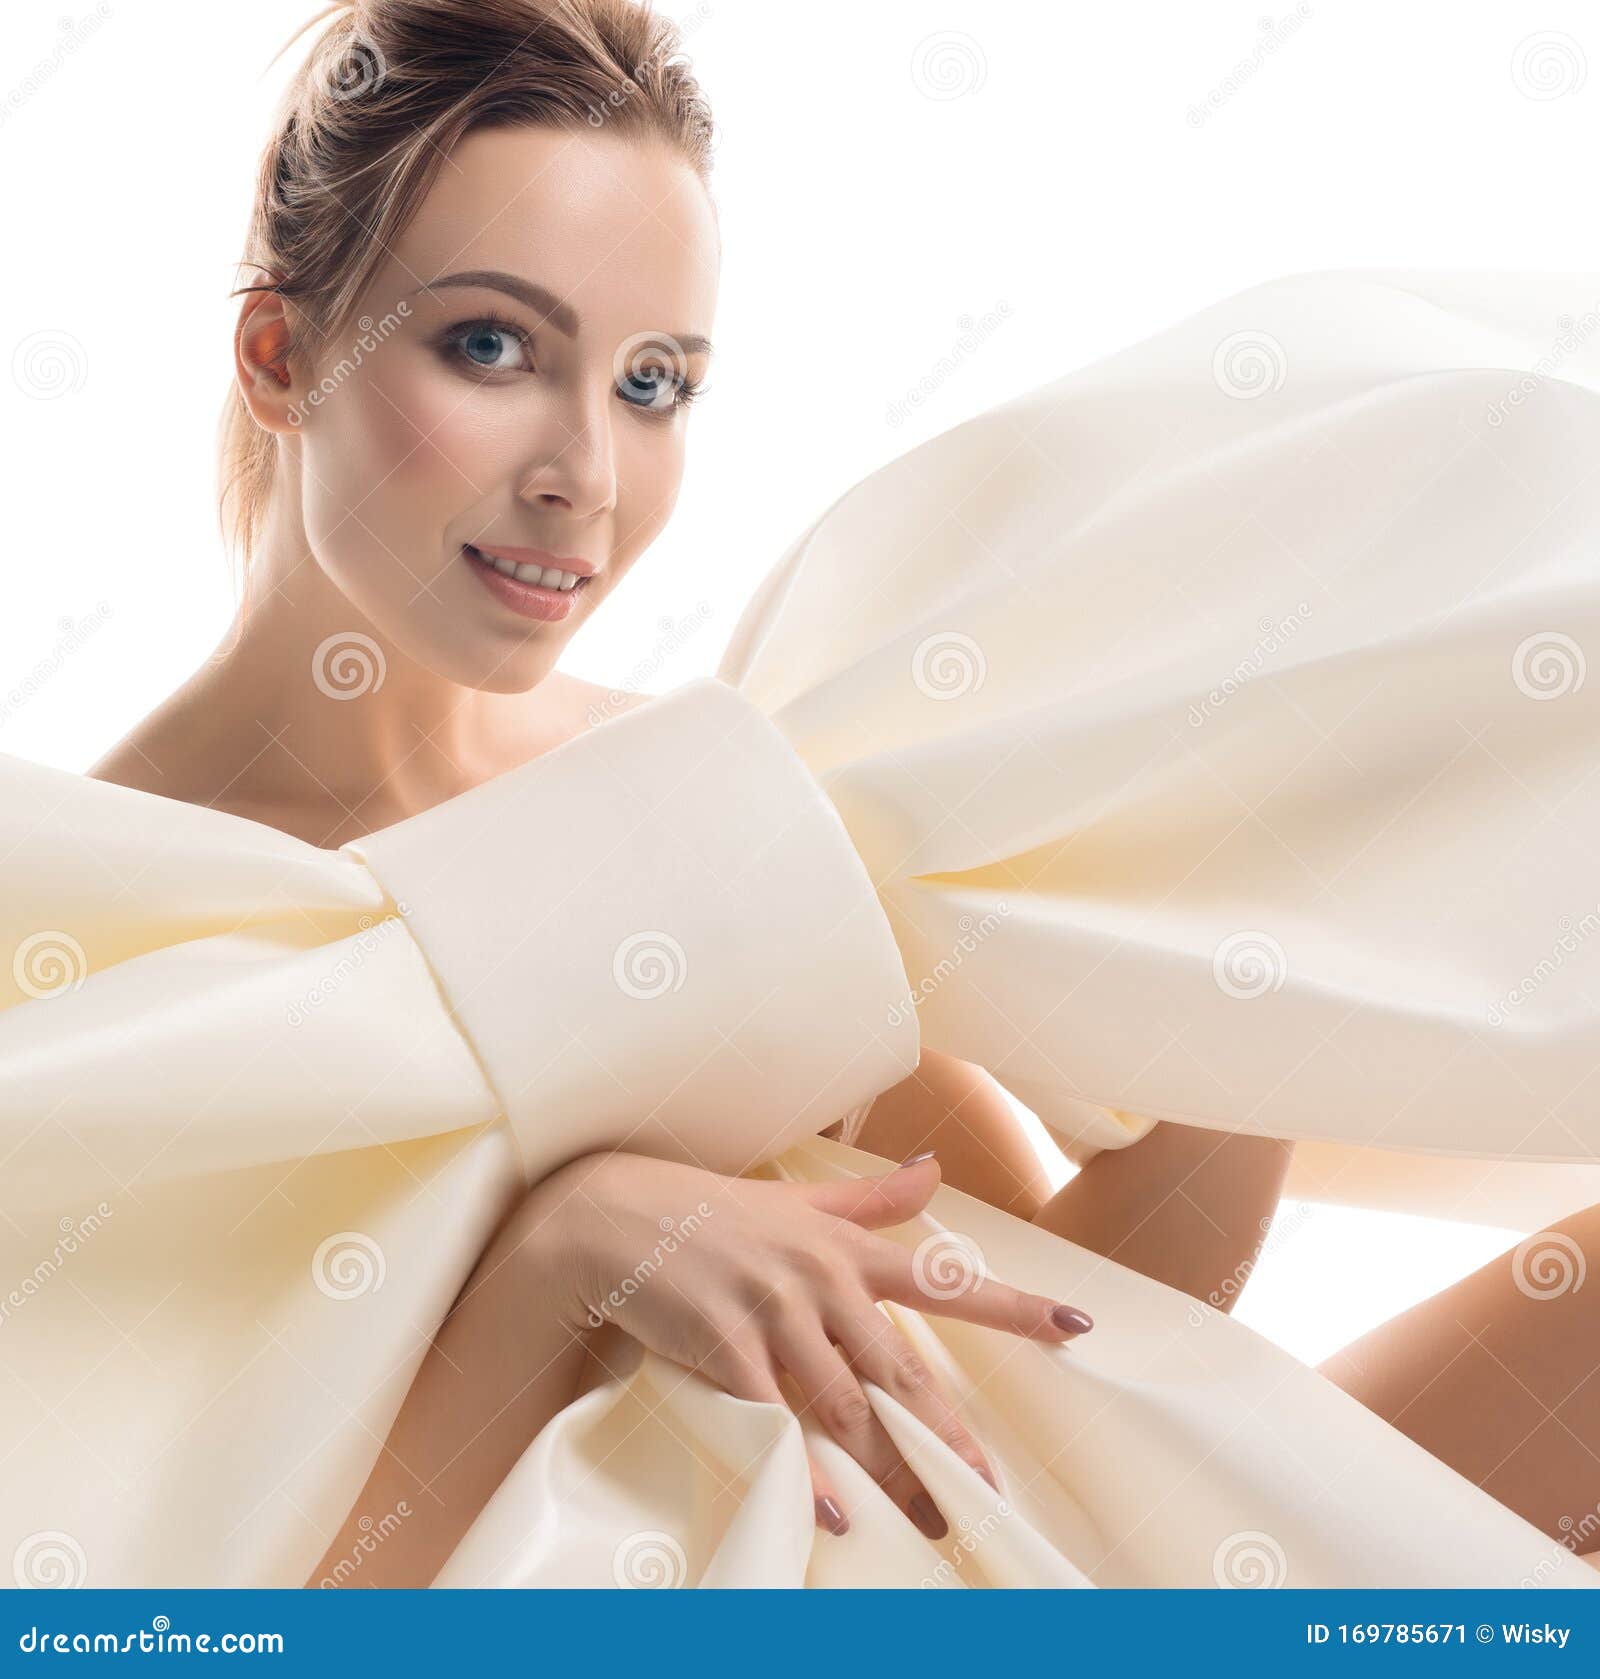 Black wallpaper nude girl pink bows 350 Naked Girl Bow Photos Free Royalty Free Stock Photos From Dreamstime